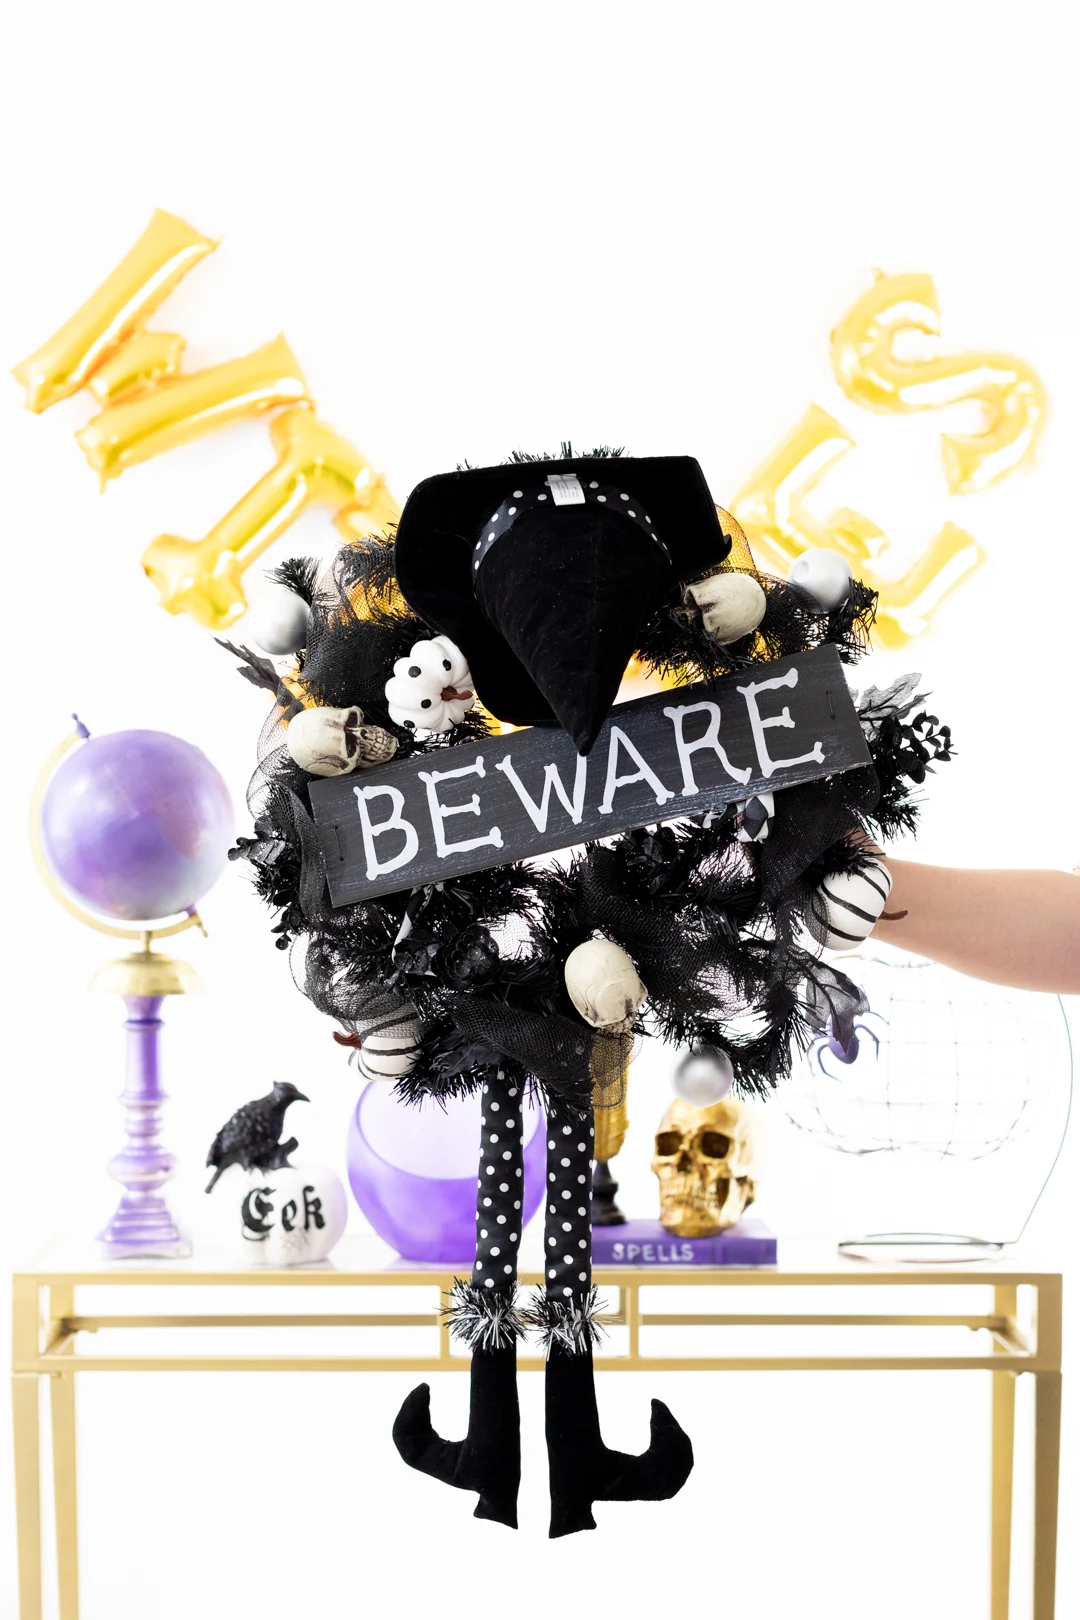 Beware witch wreath for Halloween